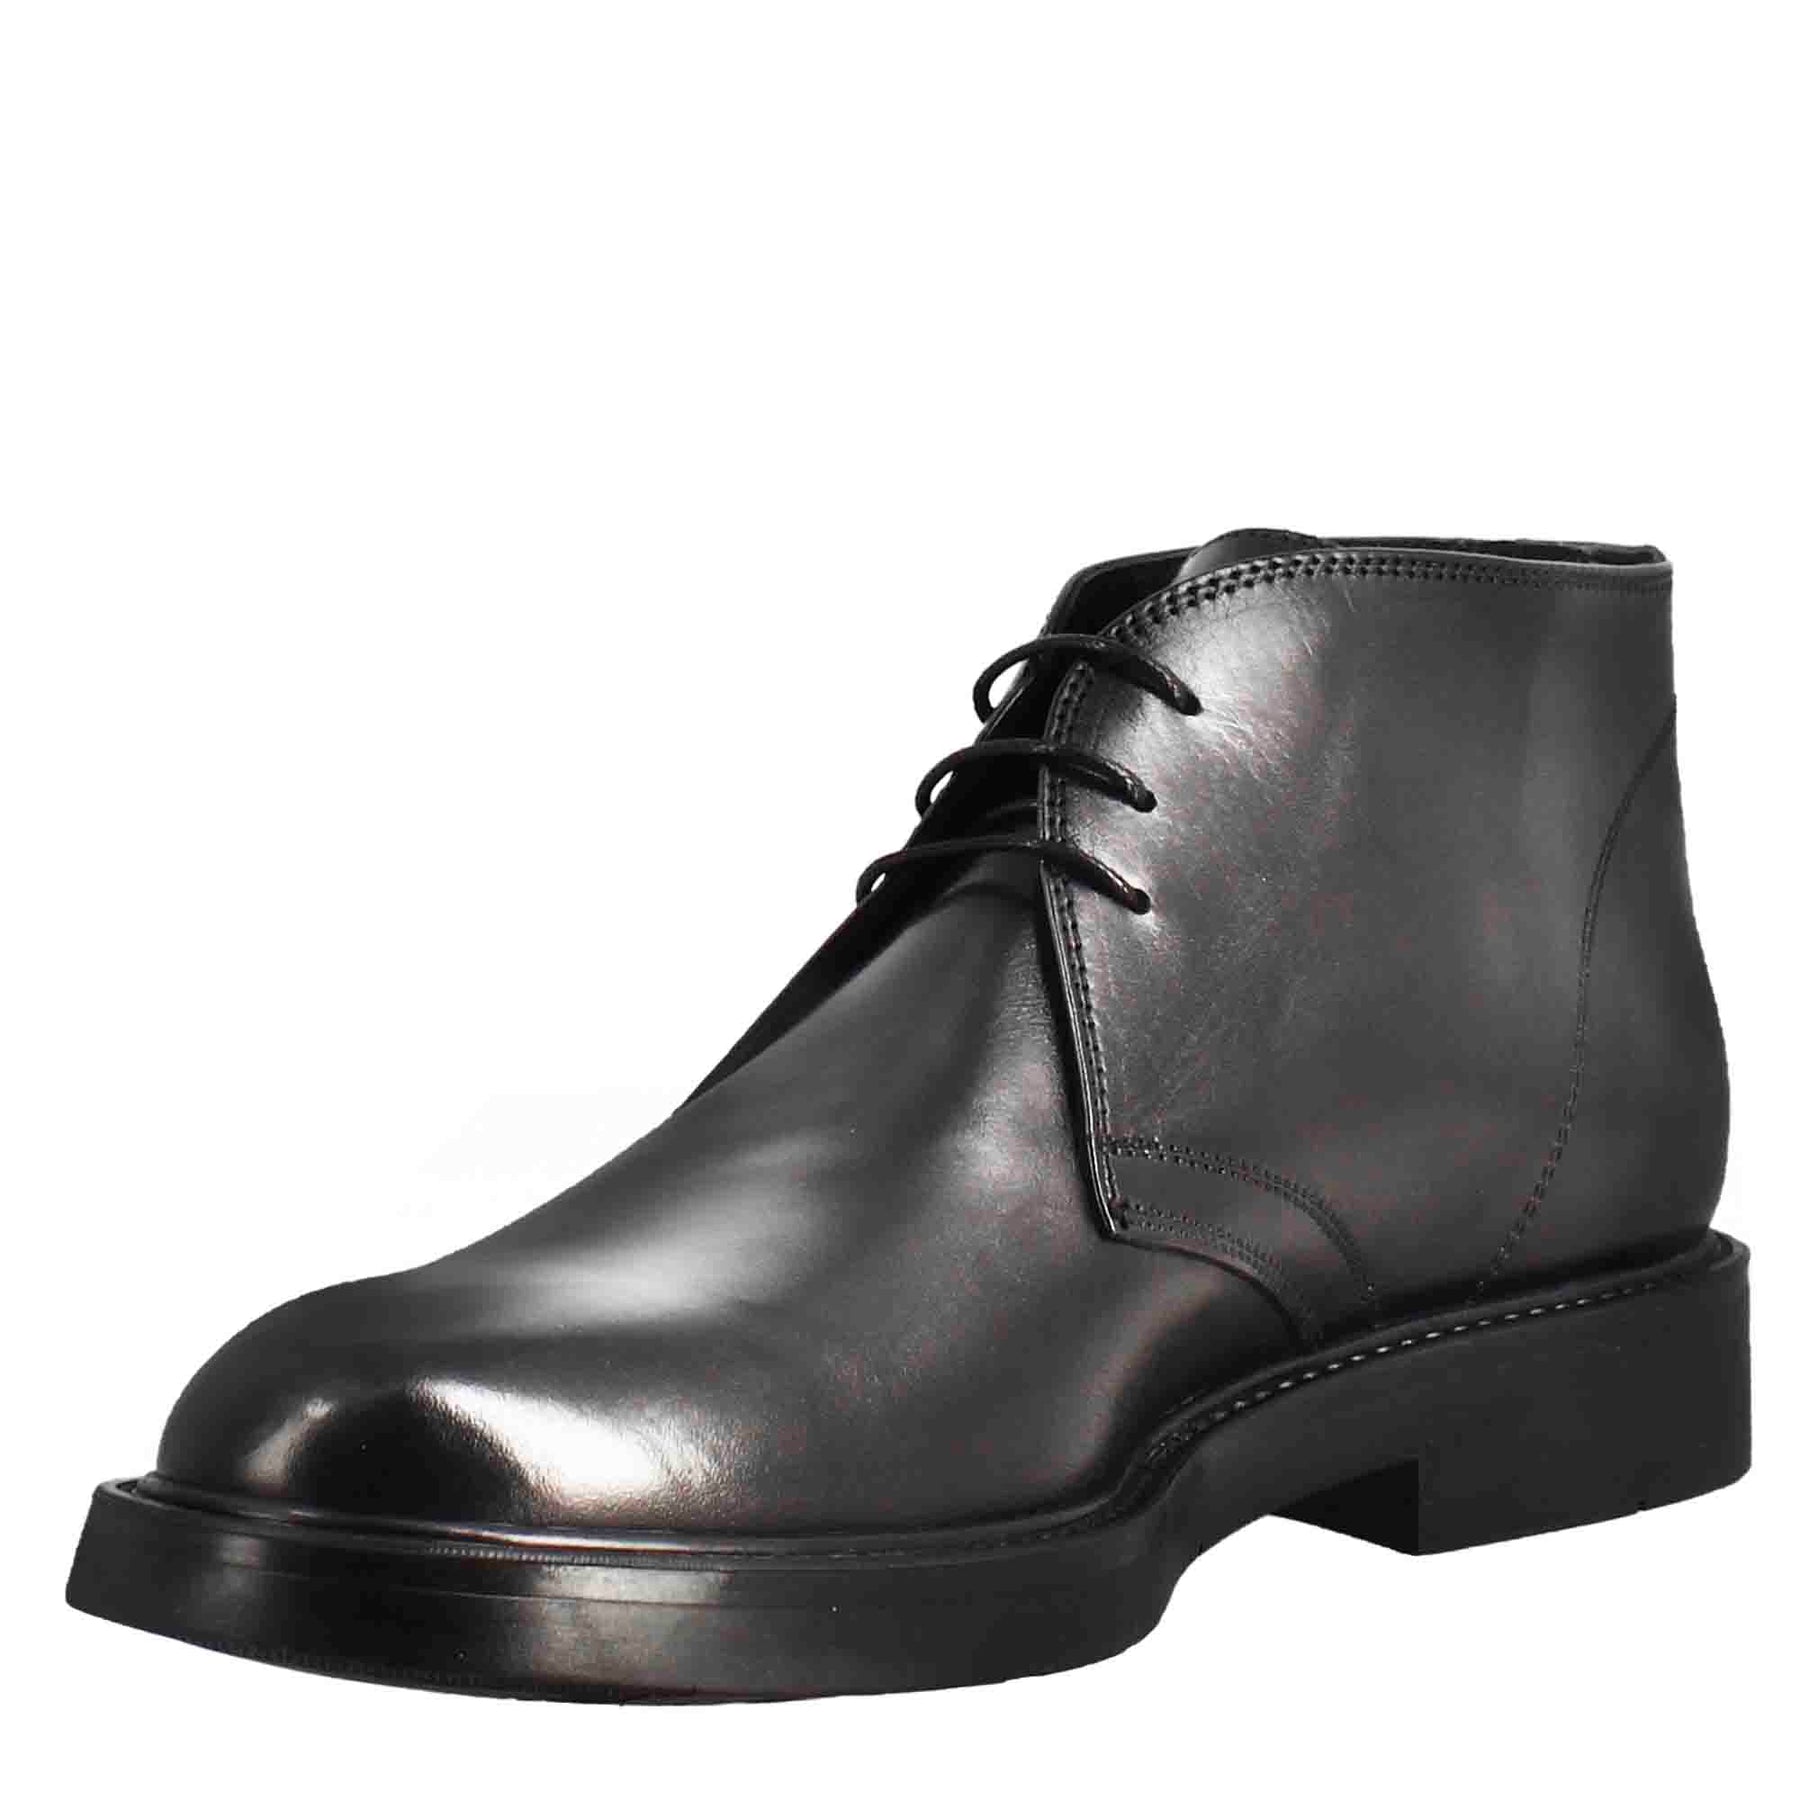 Smooth black full-grain leather men's ankle boot